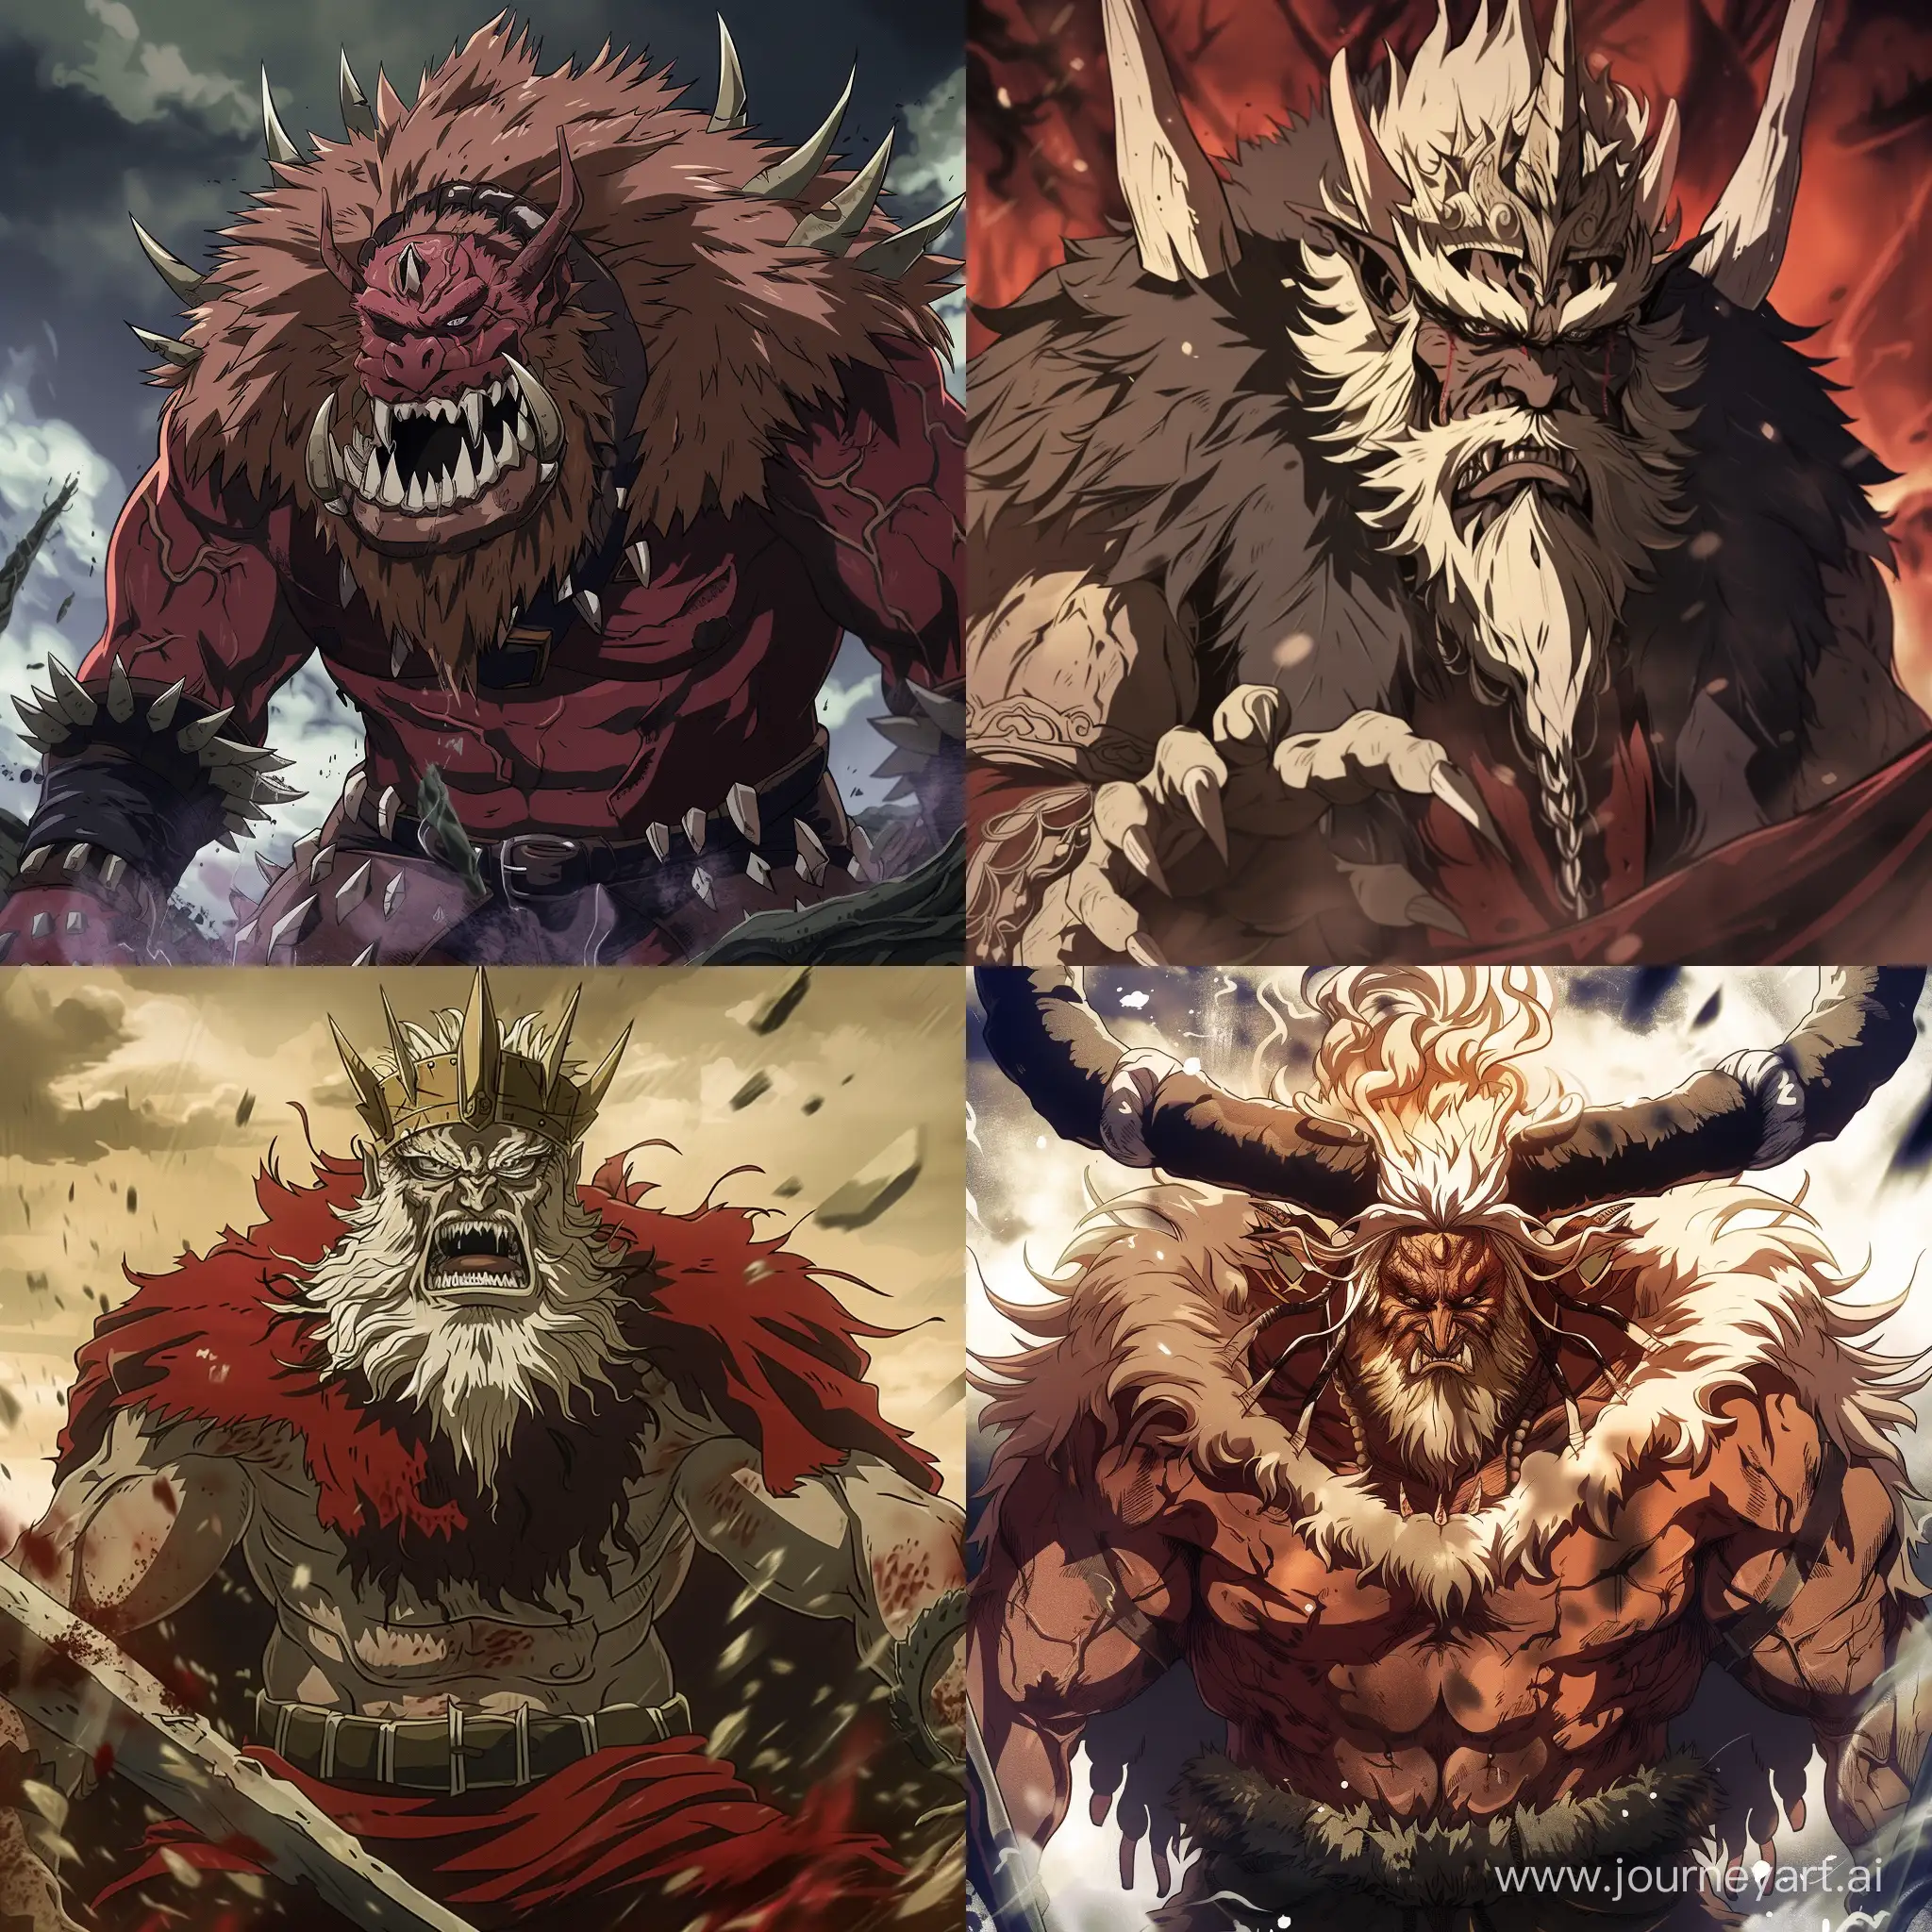 An anime style terrifying and powerful king of ogres.